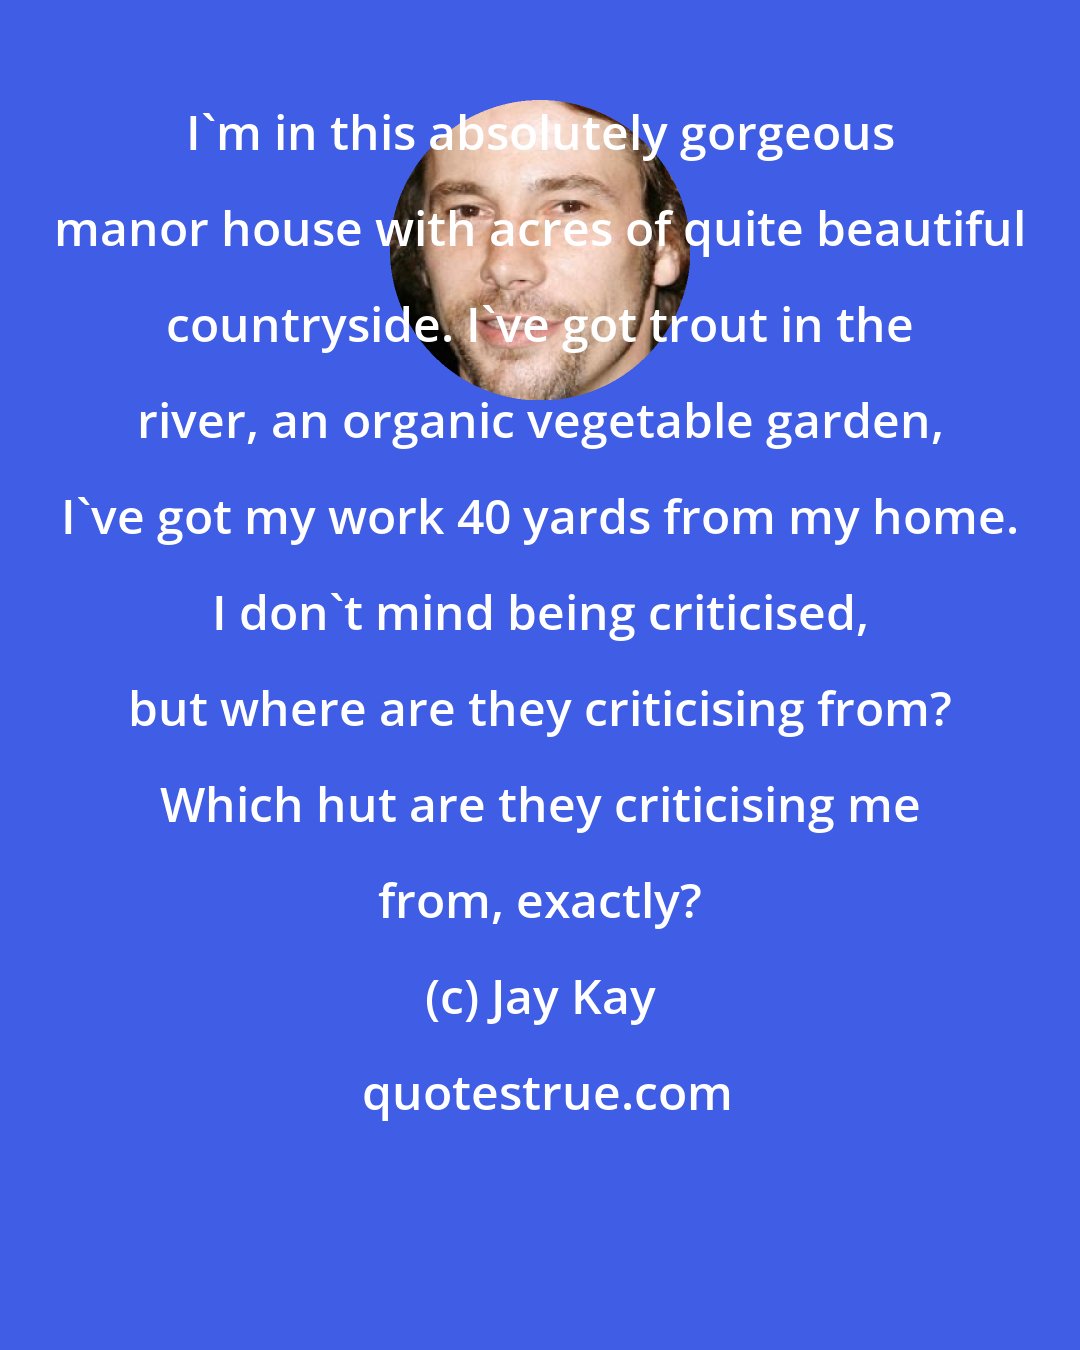 Jay Kay: I'm in this absolutely gorgeous manor house with acres of quite beautiful countryside. I've got trout in the river, an organic vegetable garden, I've got my work 40 yards from my home. I don't mind being criticised, but where are they criticising from? Which hut are they criticising me from, exactly?